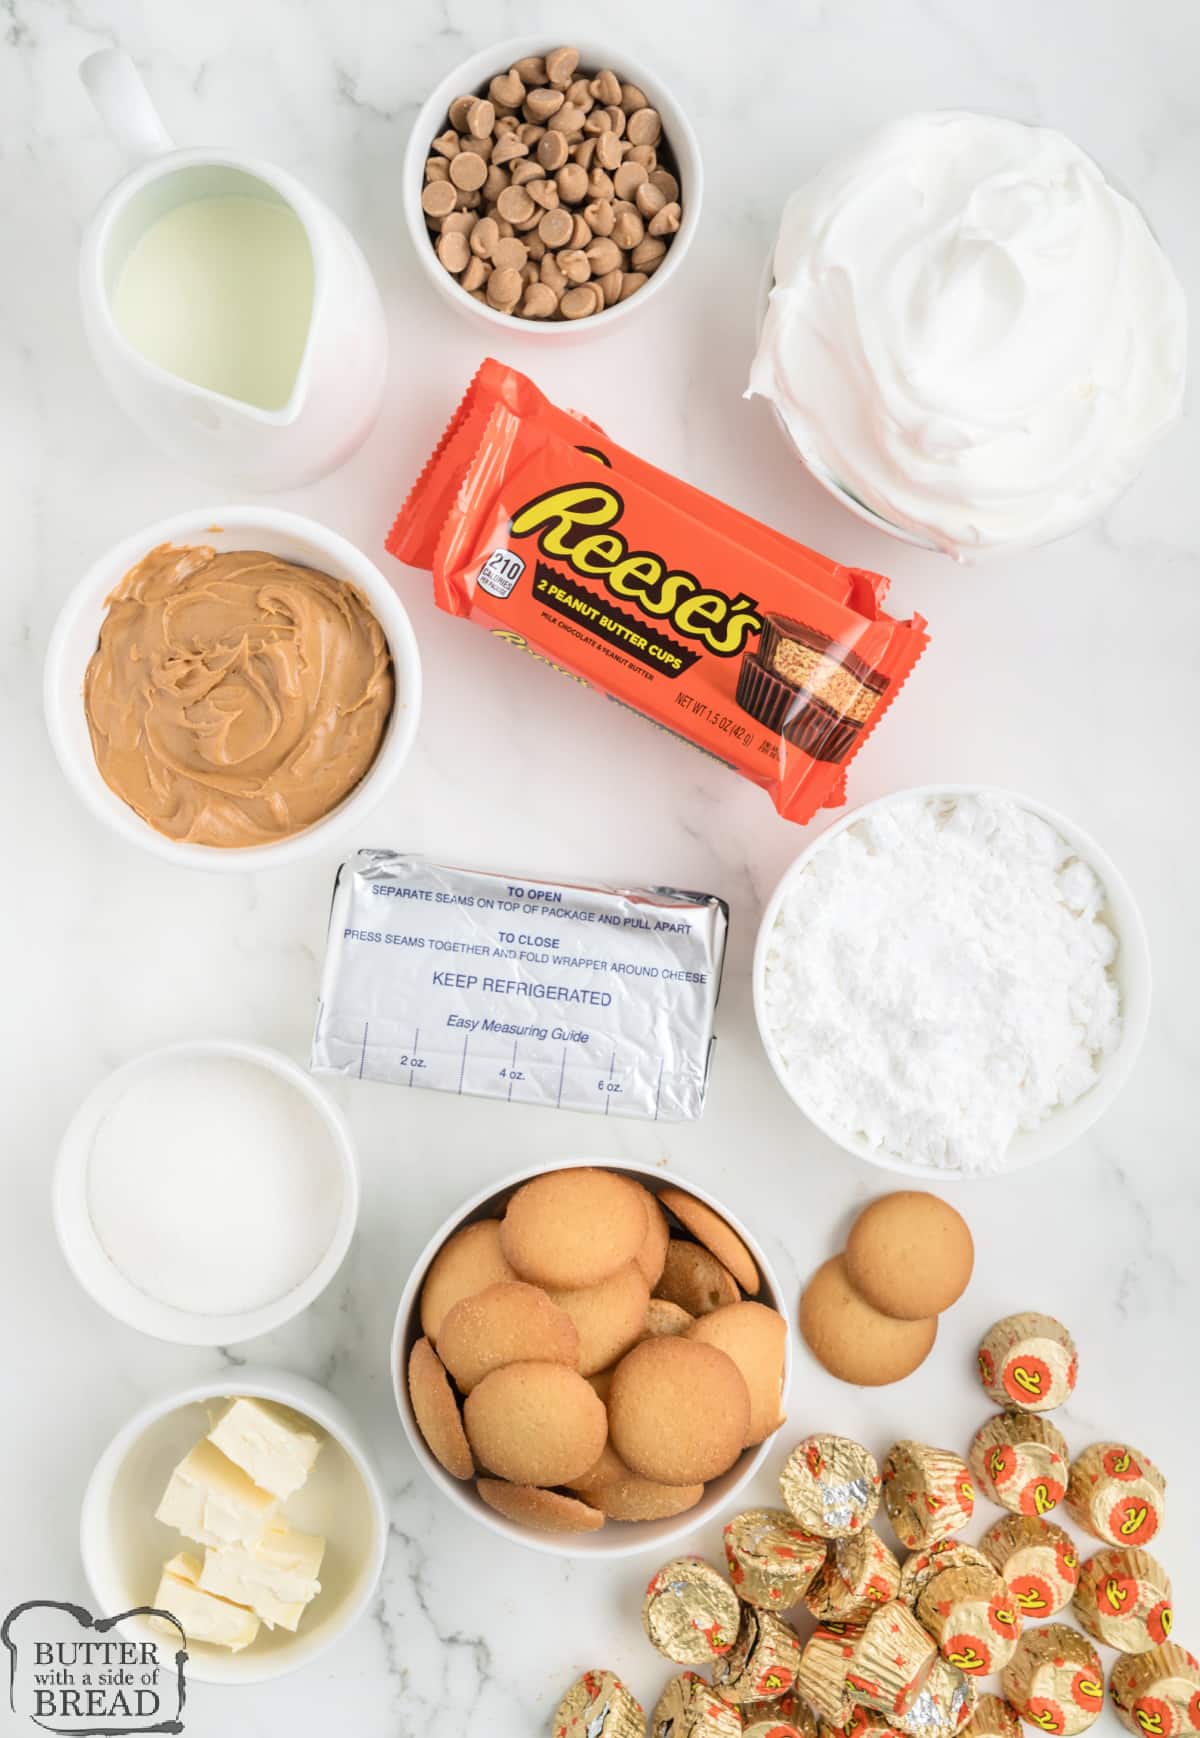 Ingredients in Reese's Peanut Butter Cup pie.